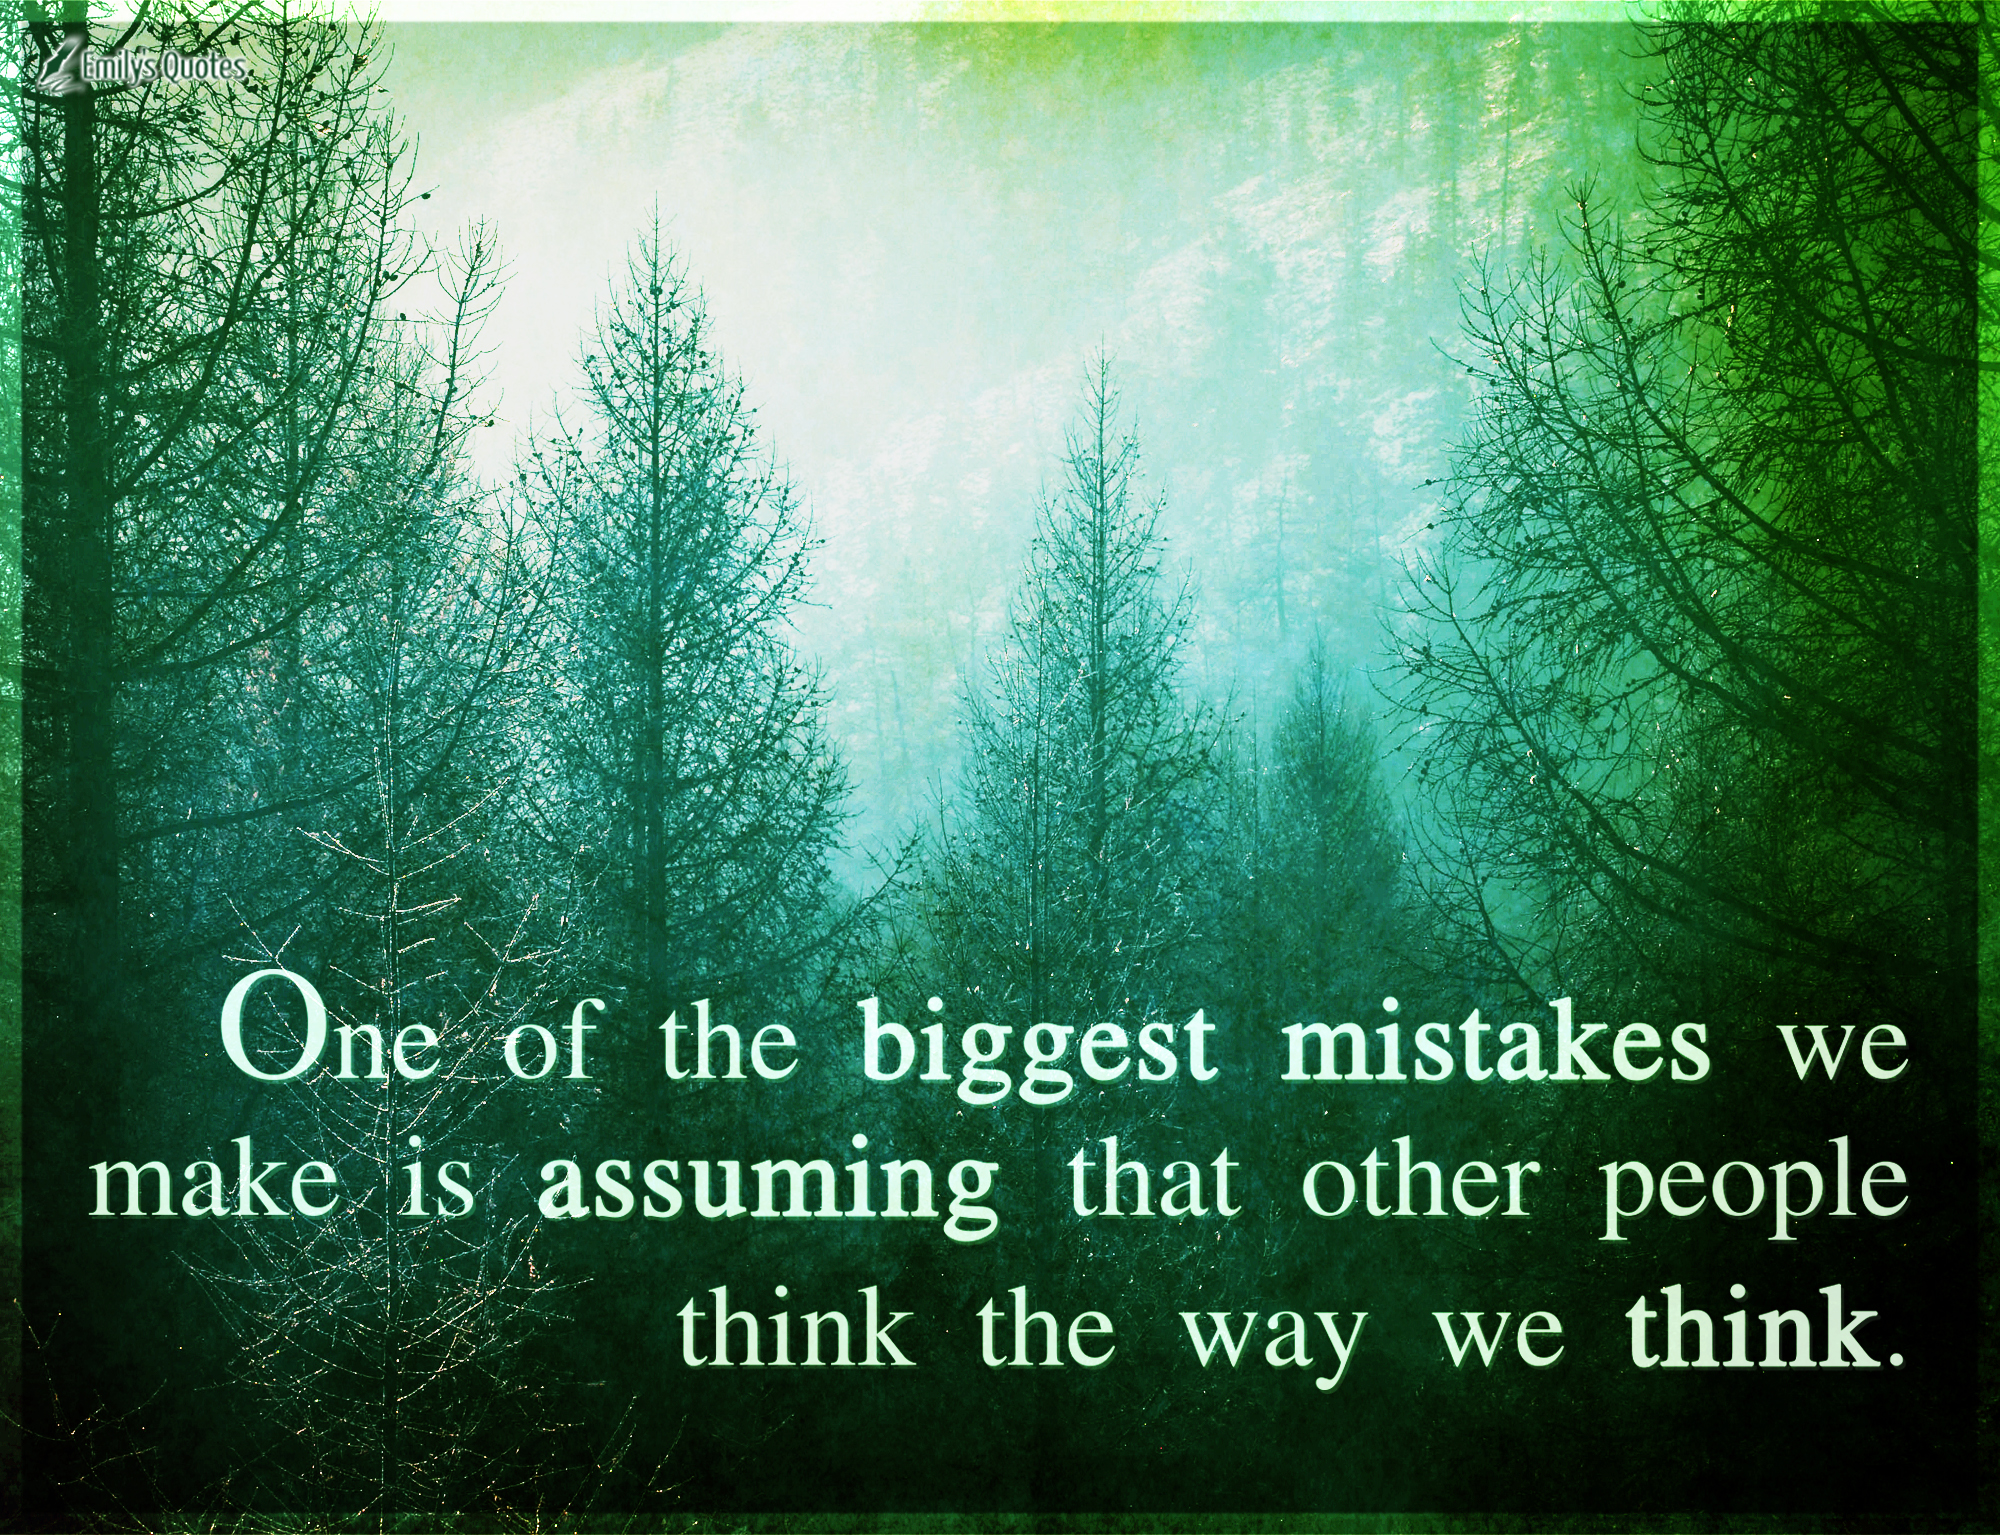 One of the biggest mistakes we make is assuming that other